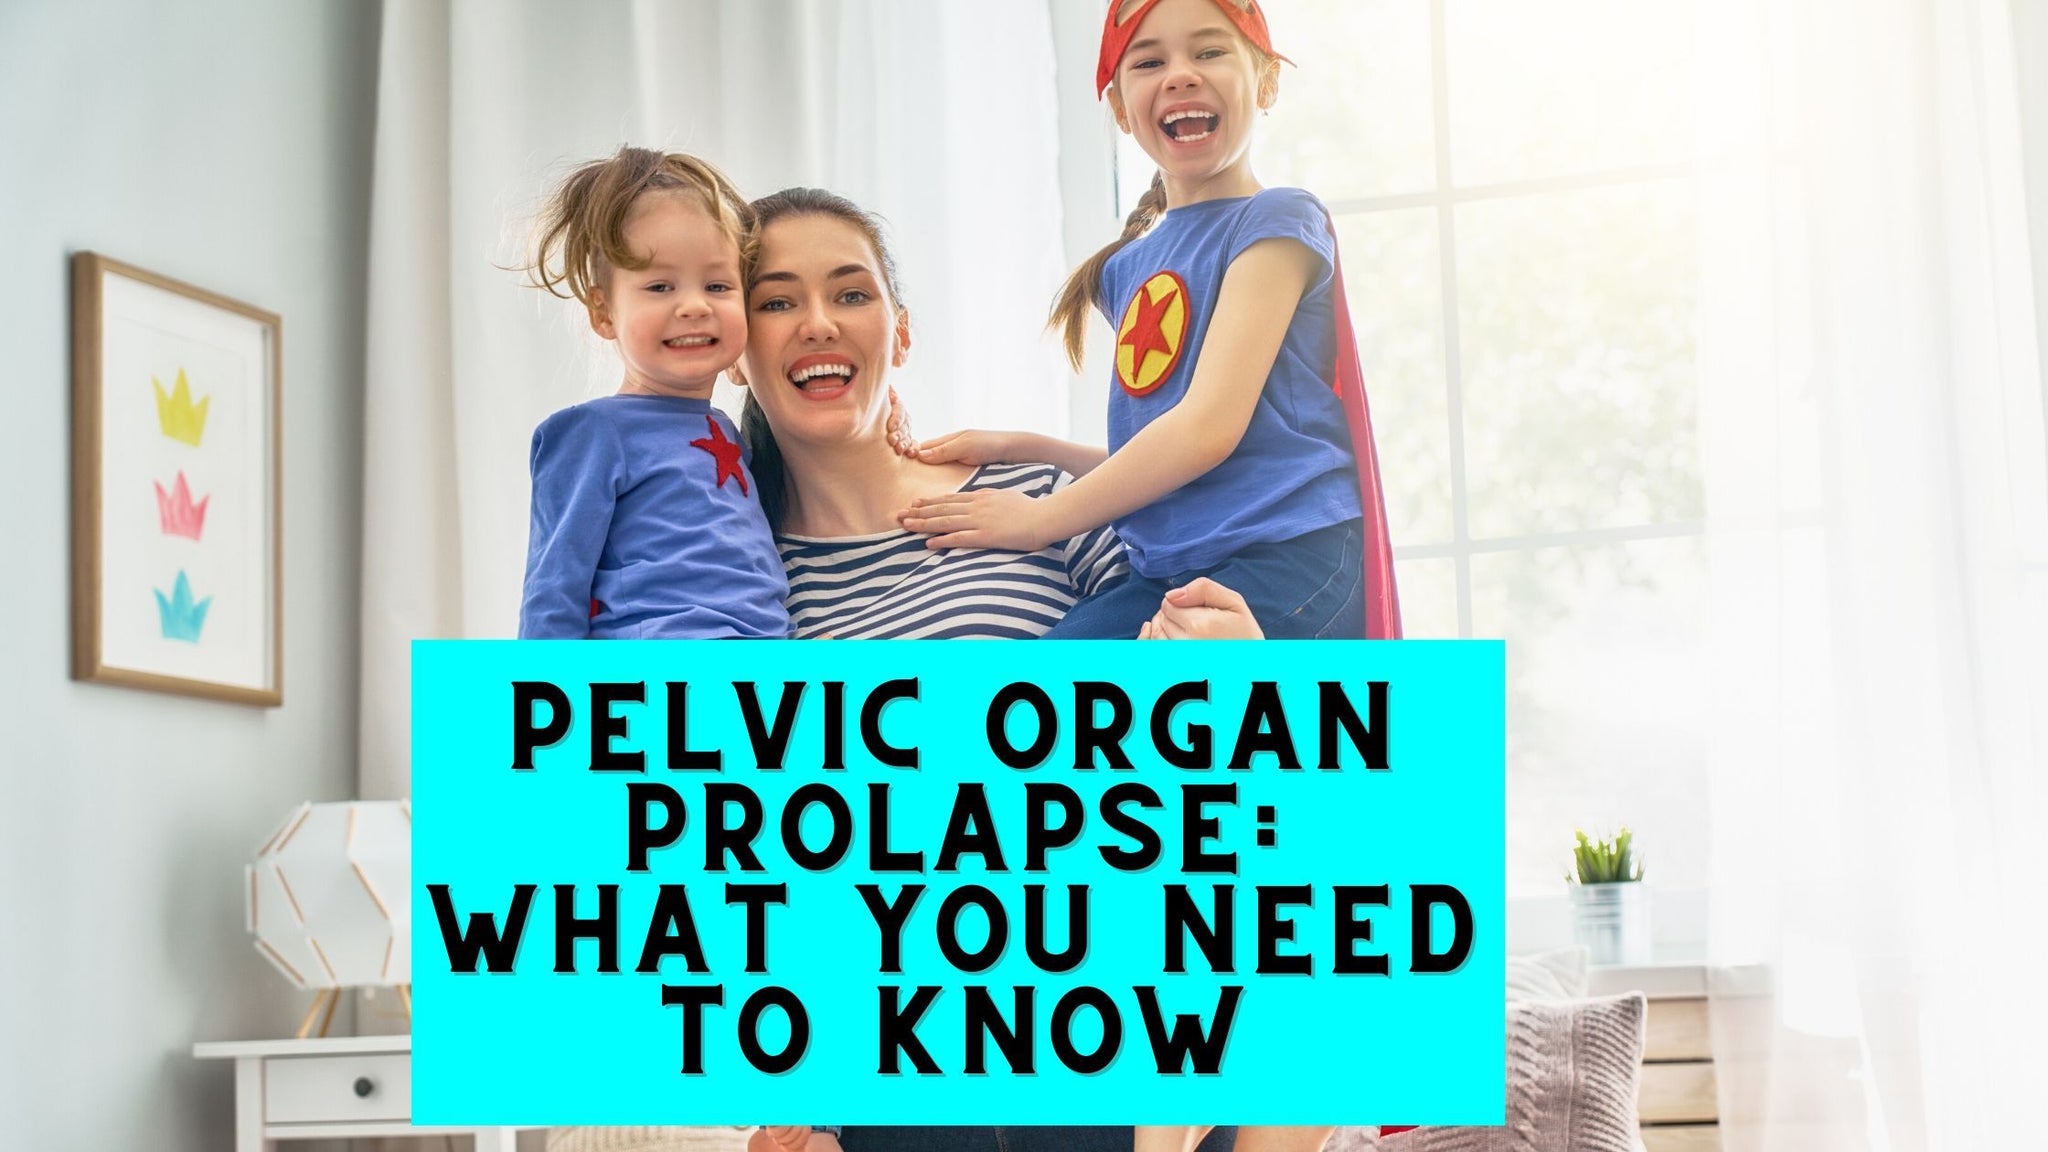 Pelvic Organ Prolapse: What You Need to Know